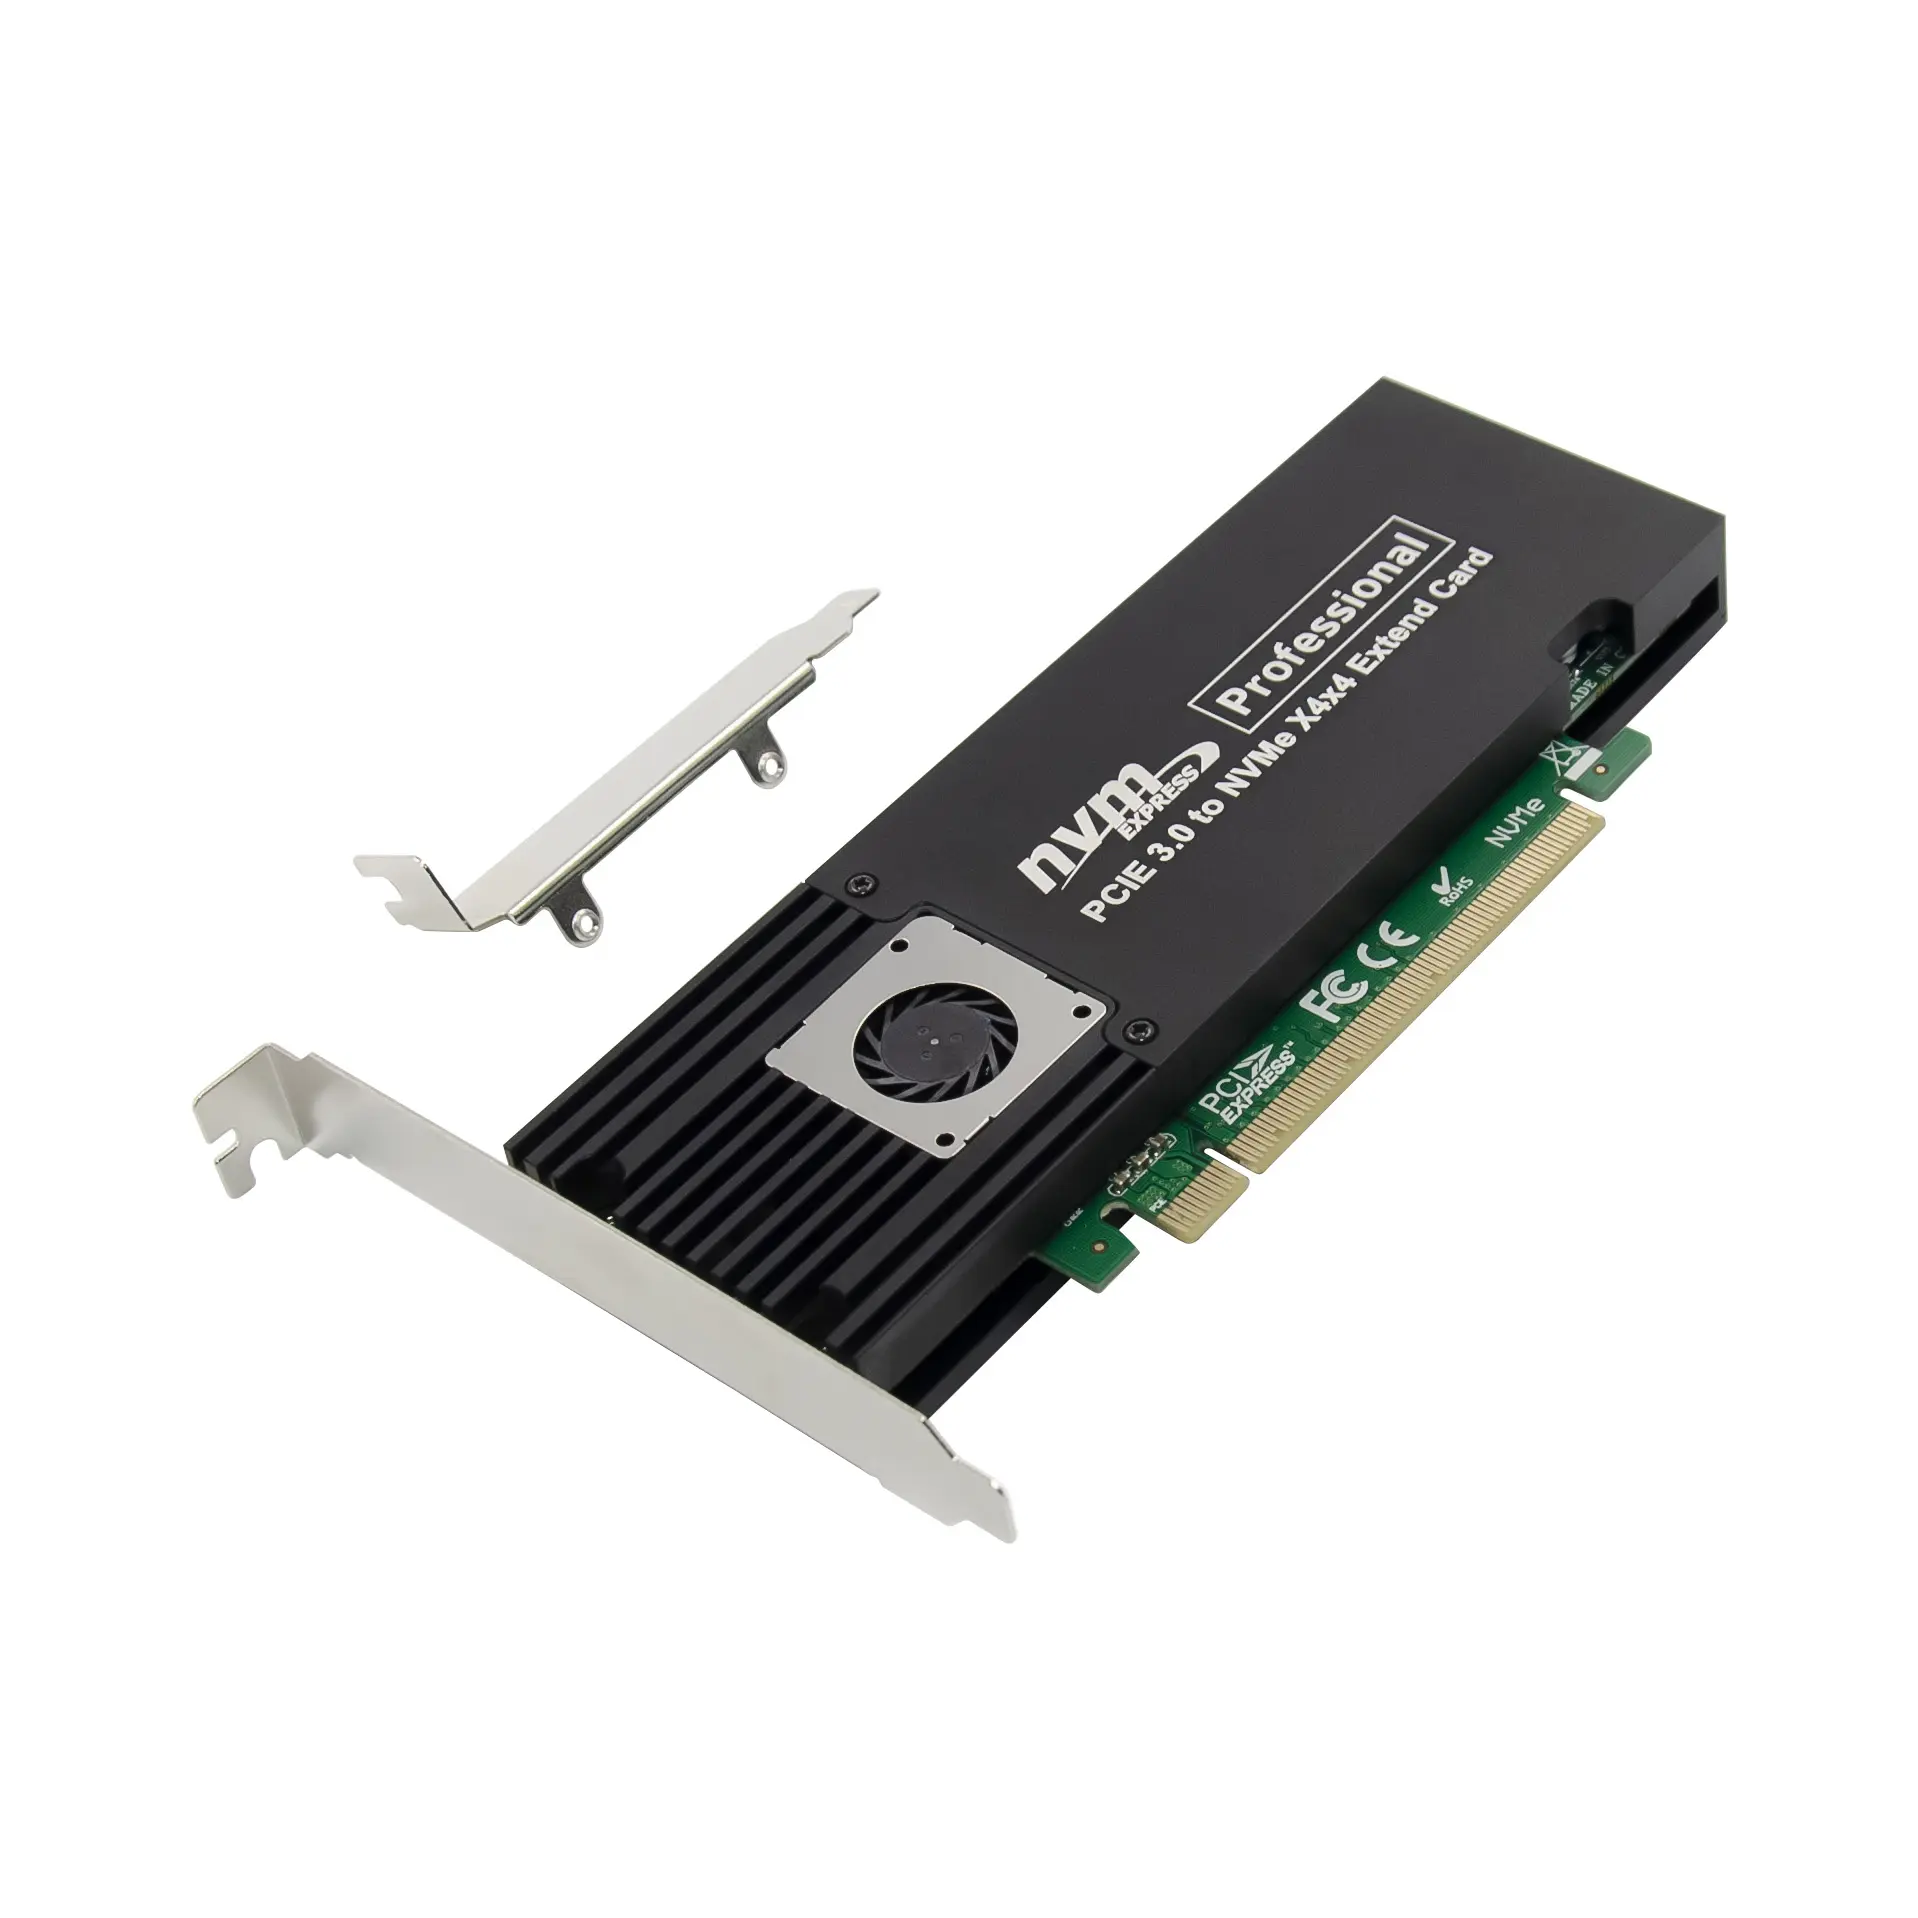 PCIe x16 ASM2824 to 4 port M.2 NVMe SSD Adapter expansion card Quad mkey nvme to pci-e converter